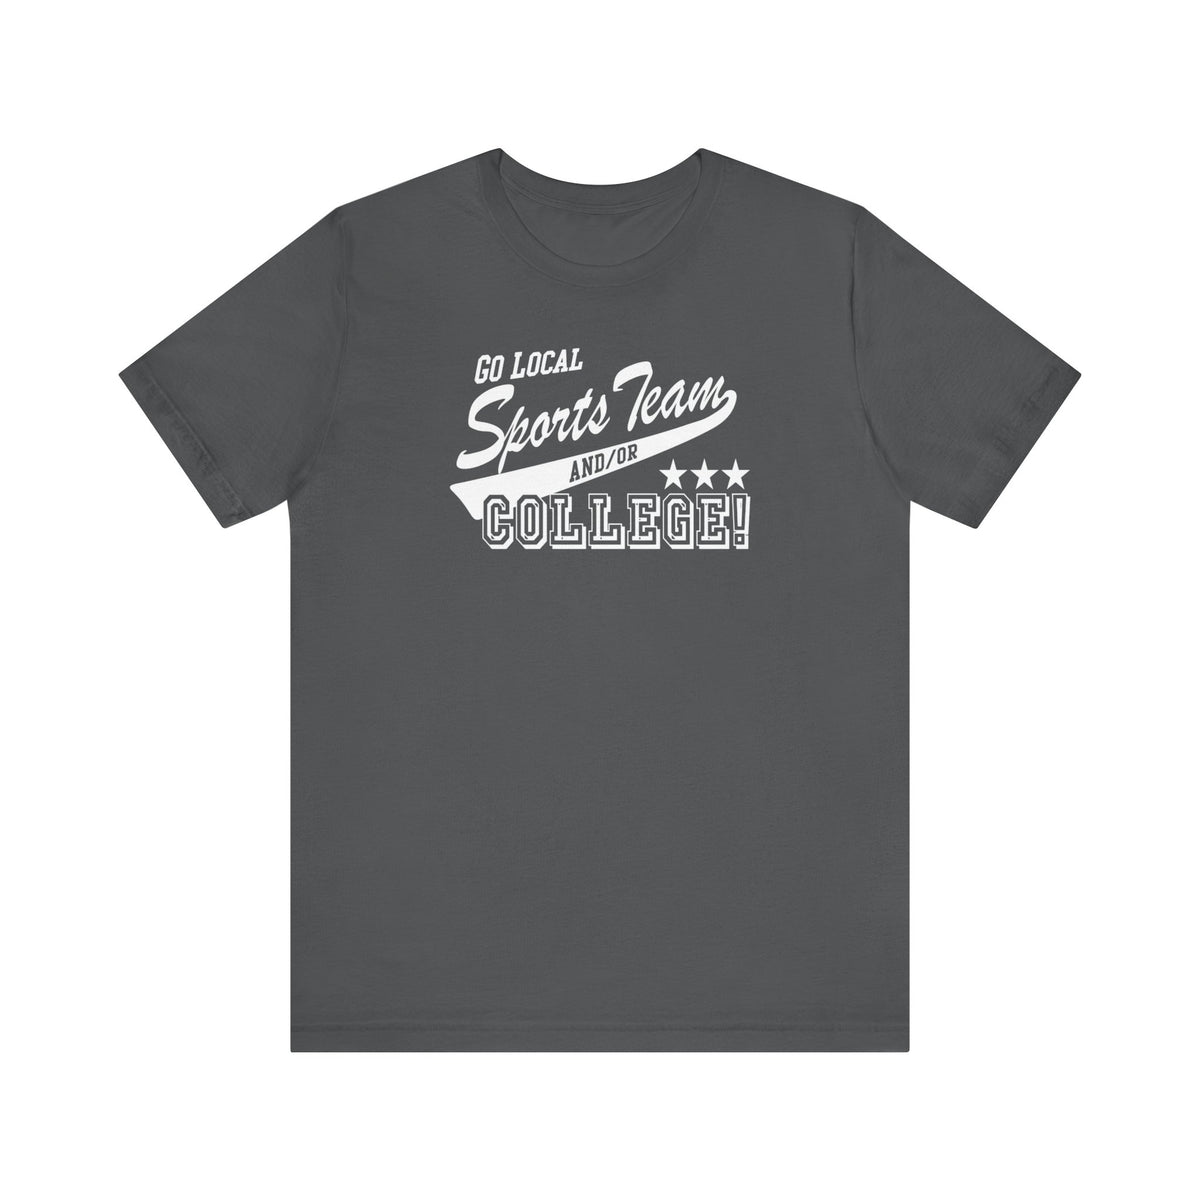 Go Local Sports Team And/Or College - Men's T-Shirt